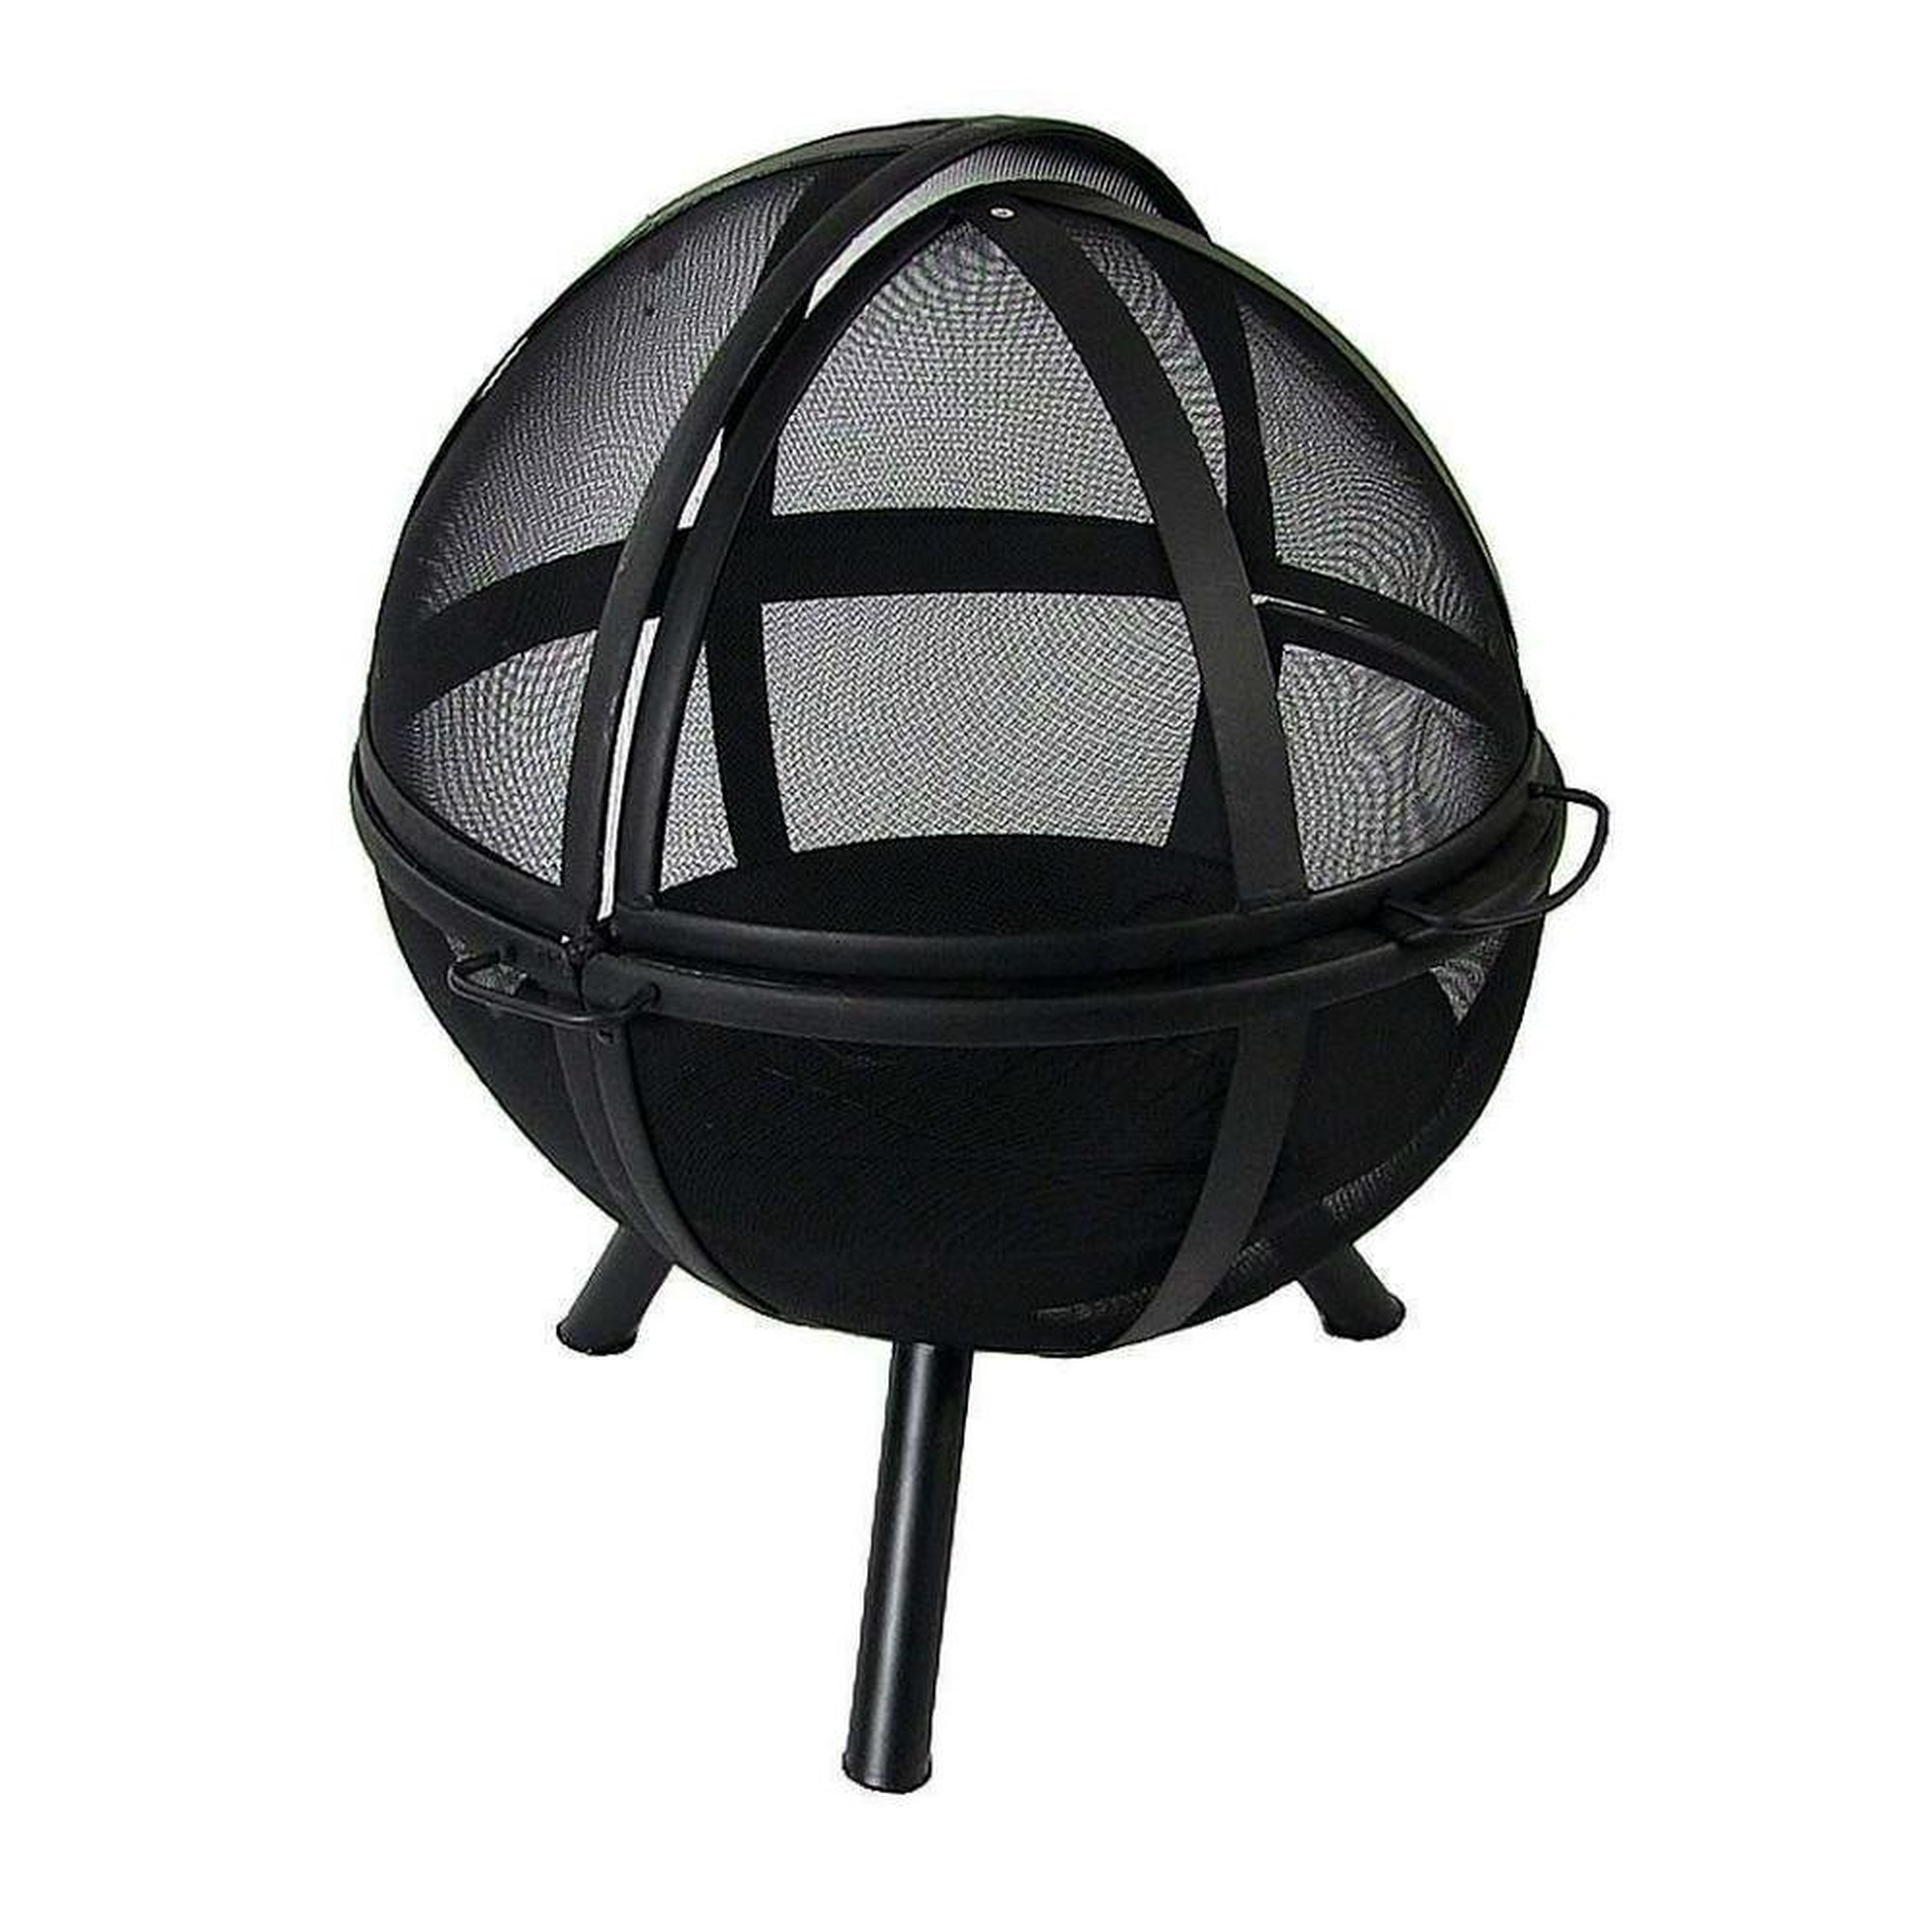 Sunnydaze Decor Flaming Ball 30 in. x 36 in. Round Steel Wood Burning Fire Pit in Black with Cover - Home Depot